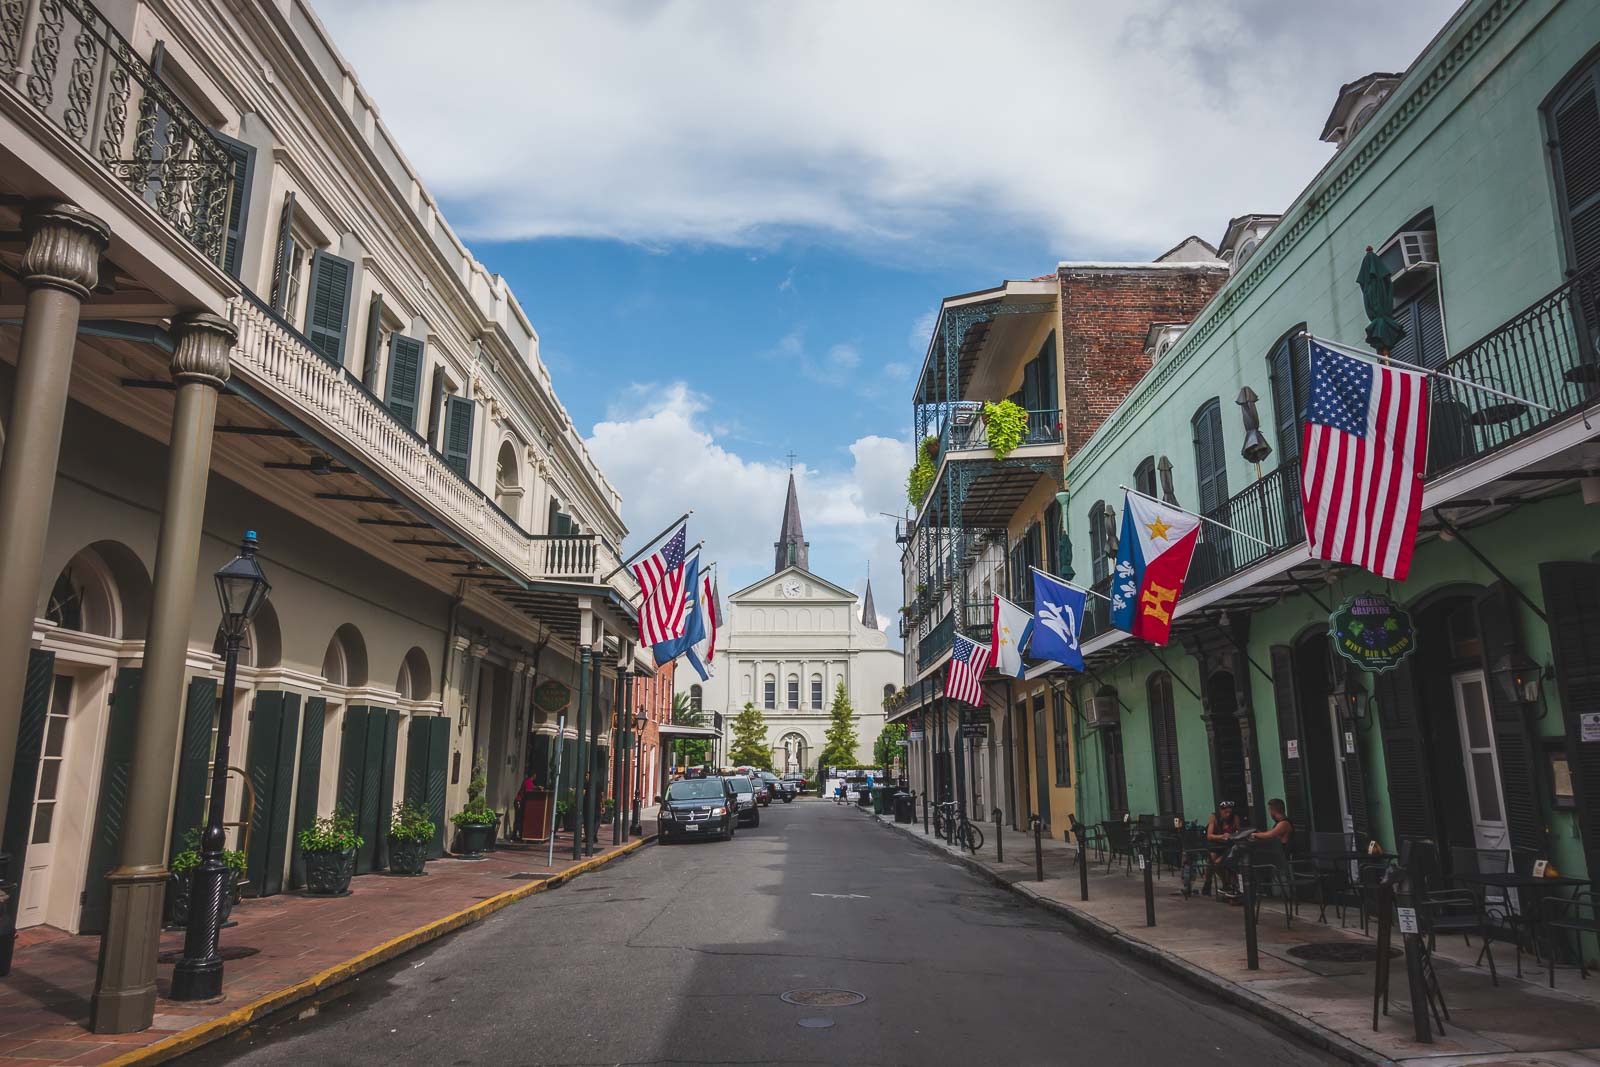 Where to stay in New Orleans near Bourbon Street